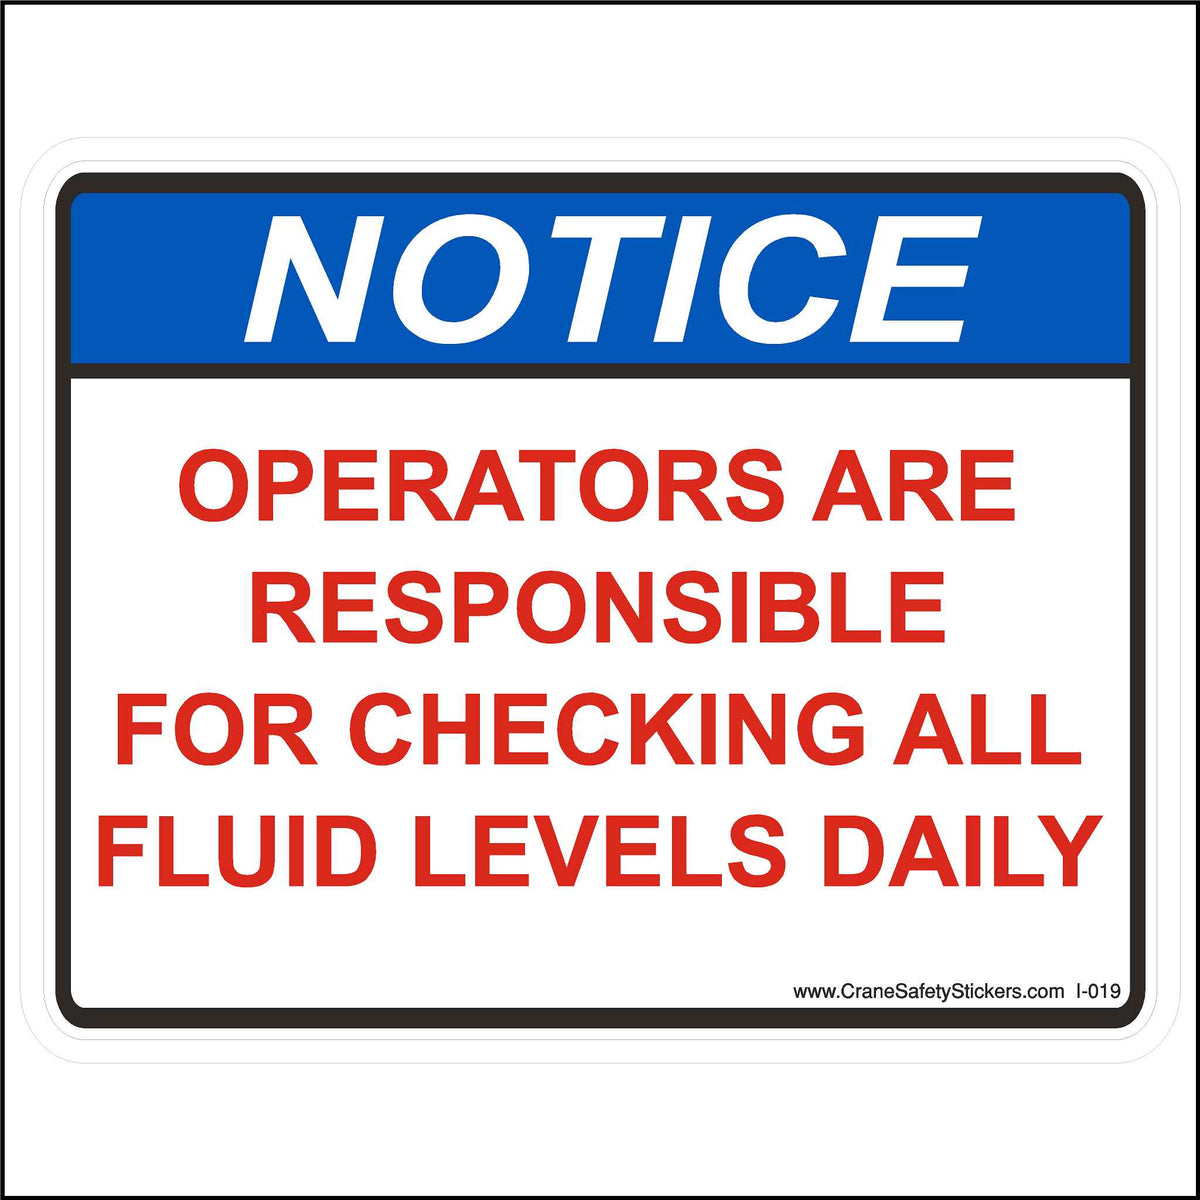 Operators Are Responsible For Checking All Fluid Levels Daily Sticker. ANSI NOTICE Header in blue and the text is  printed in red on a white background.